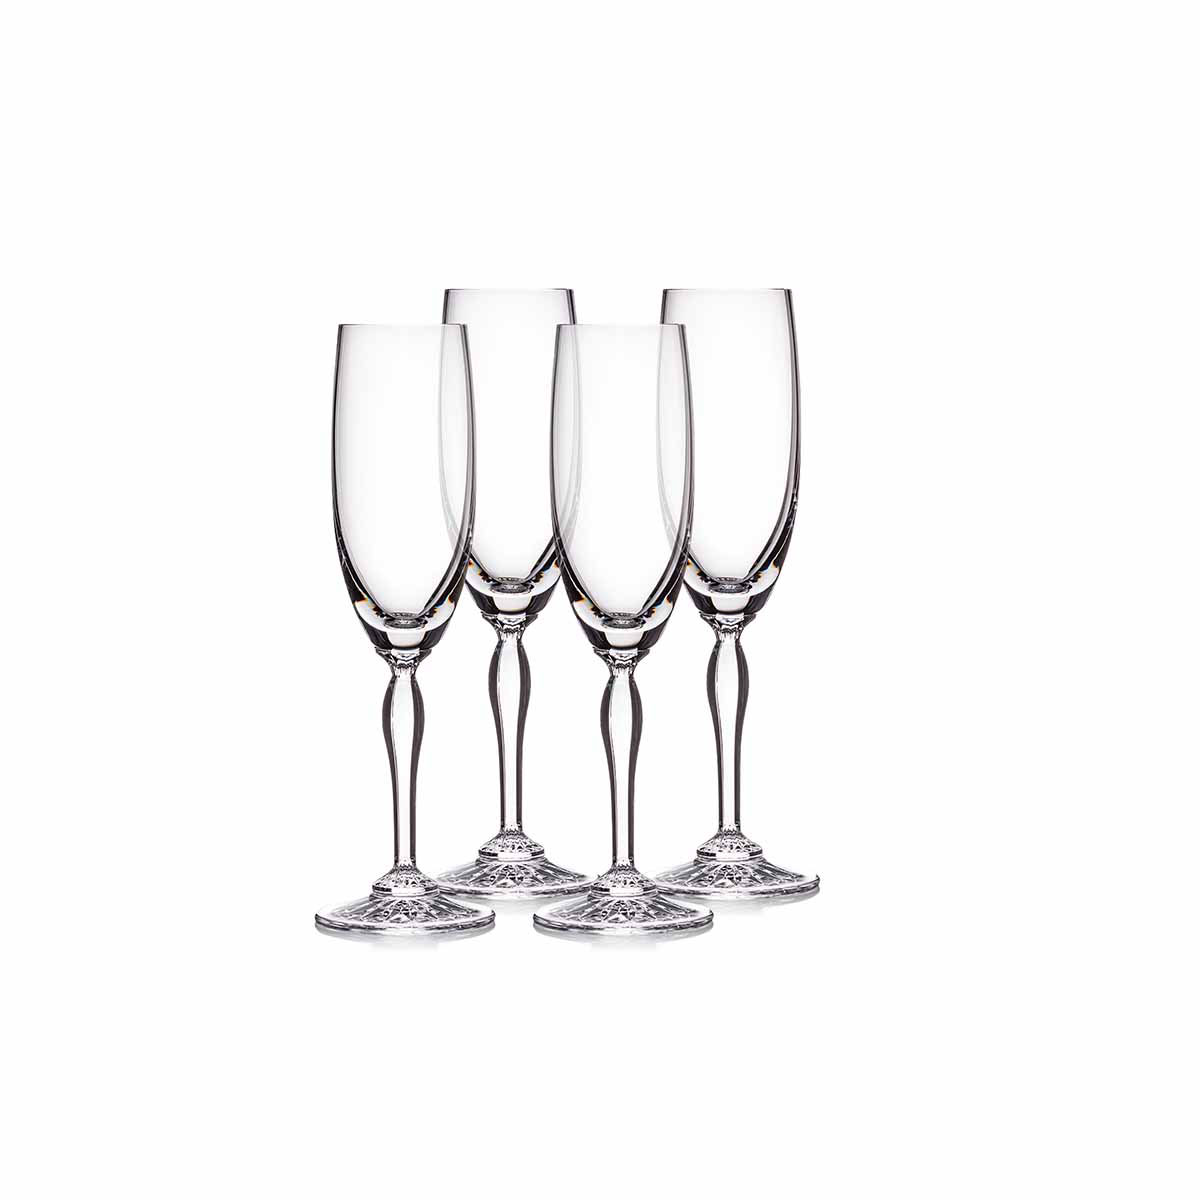 Marquis by Waterford Crystal, Ventura Crystal Flute, Set of 4